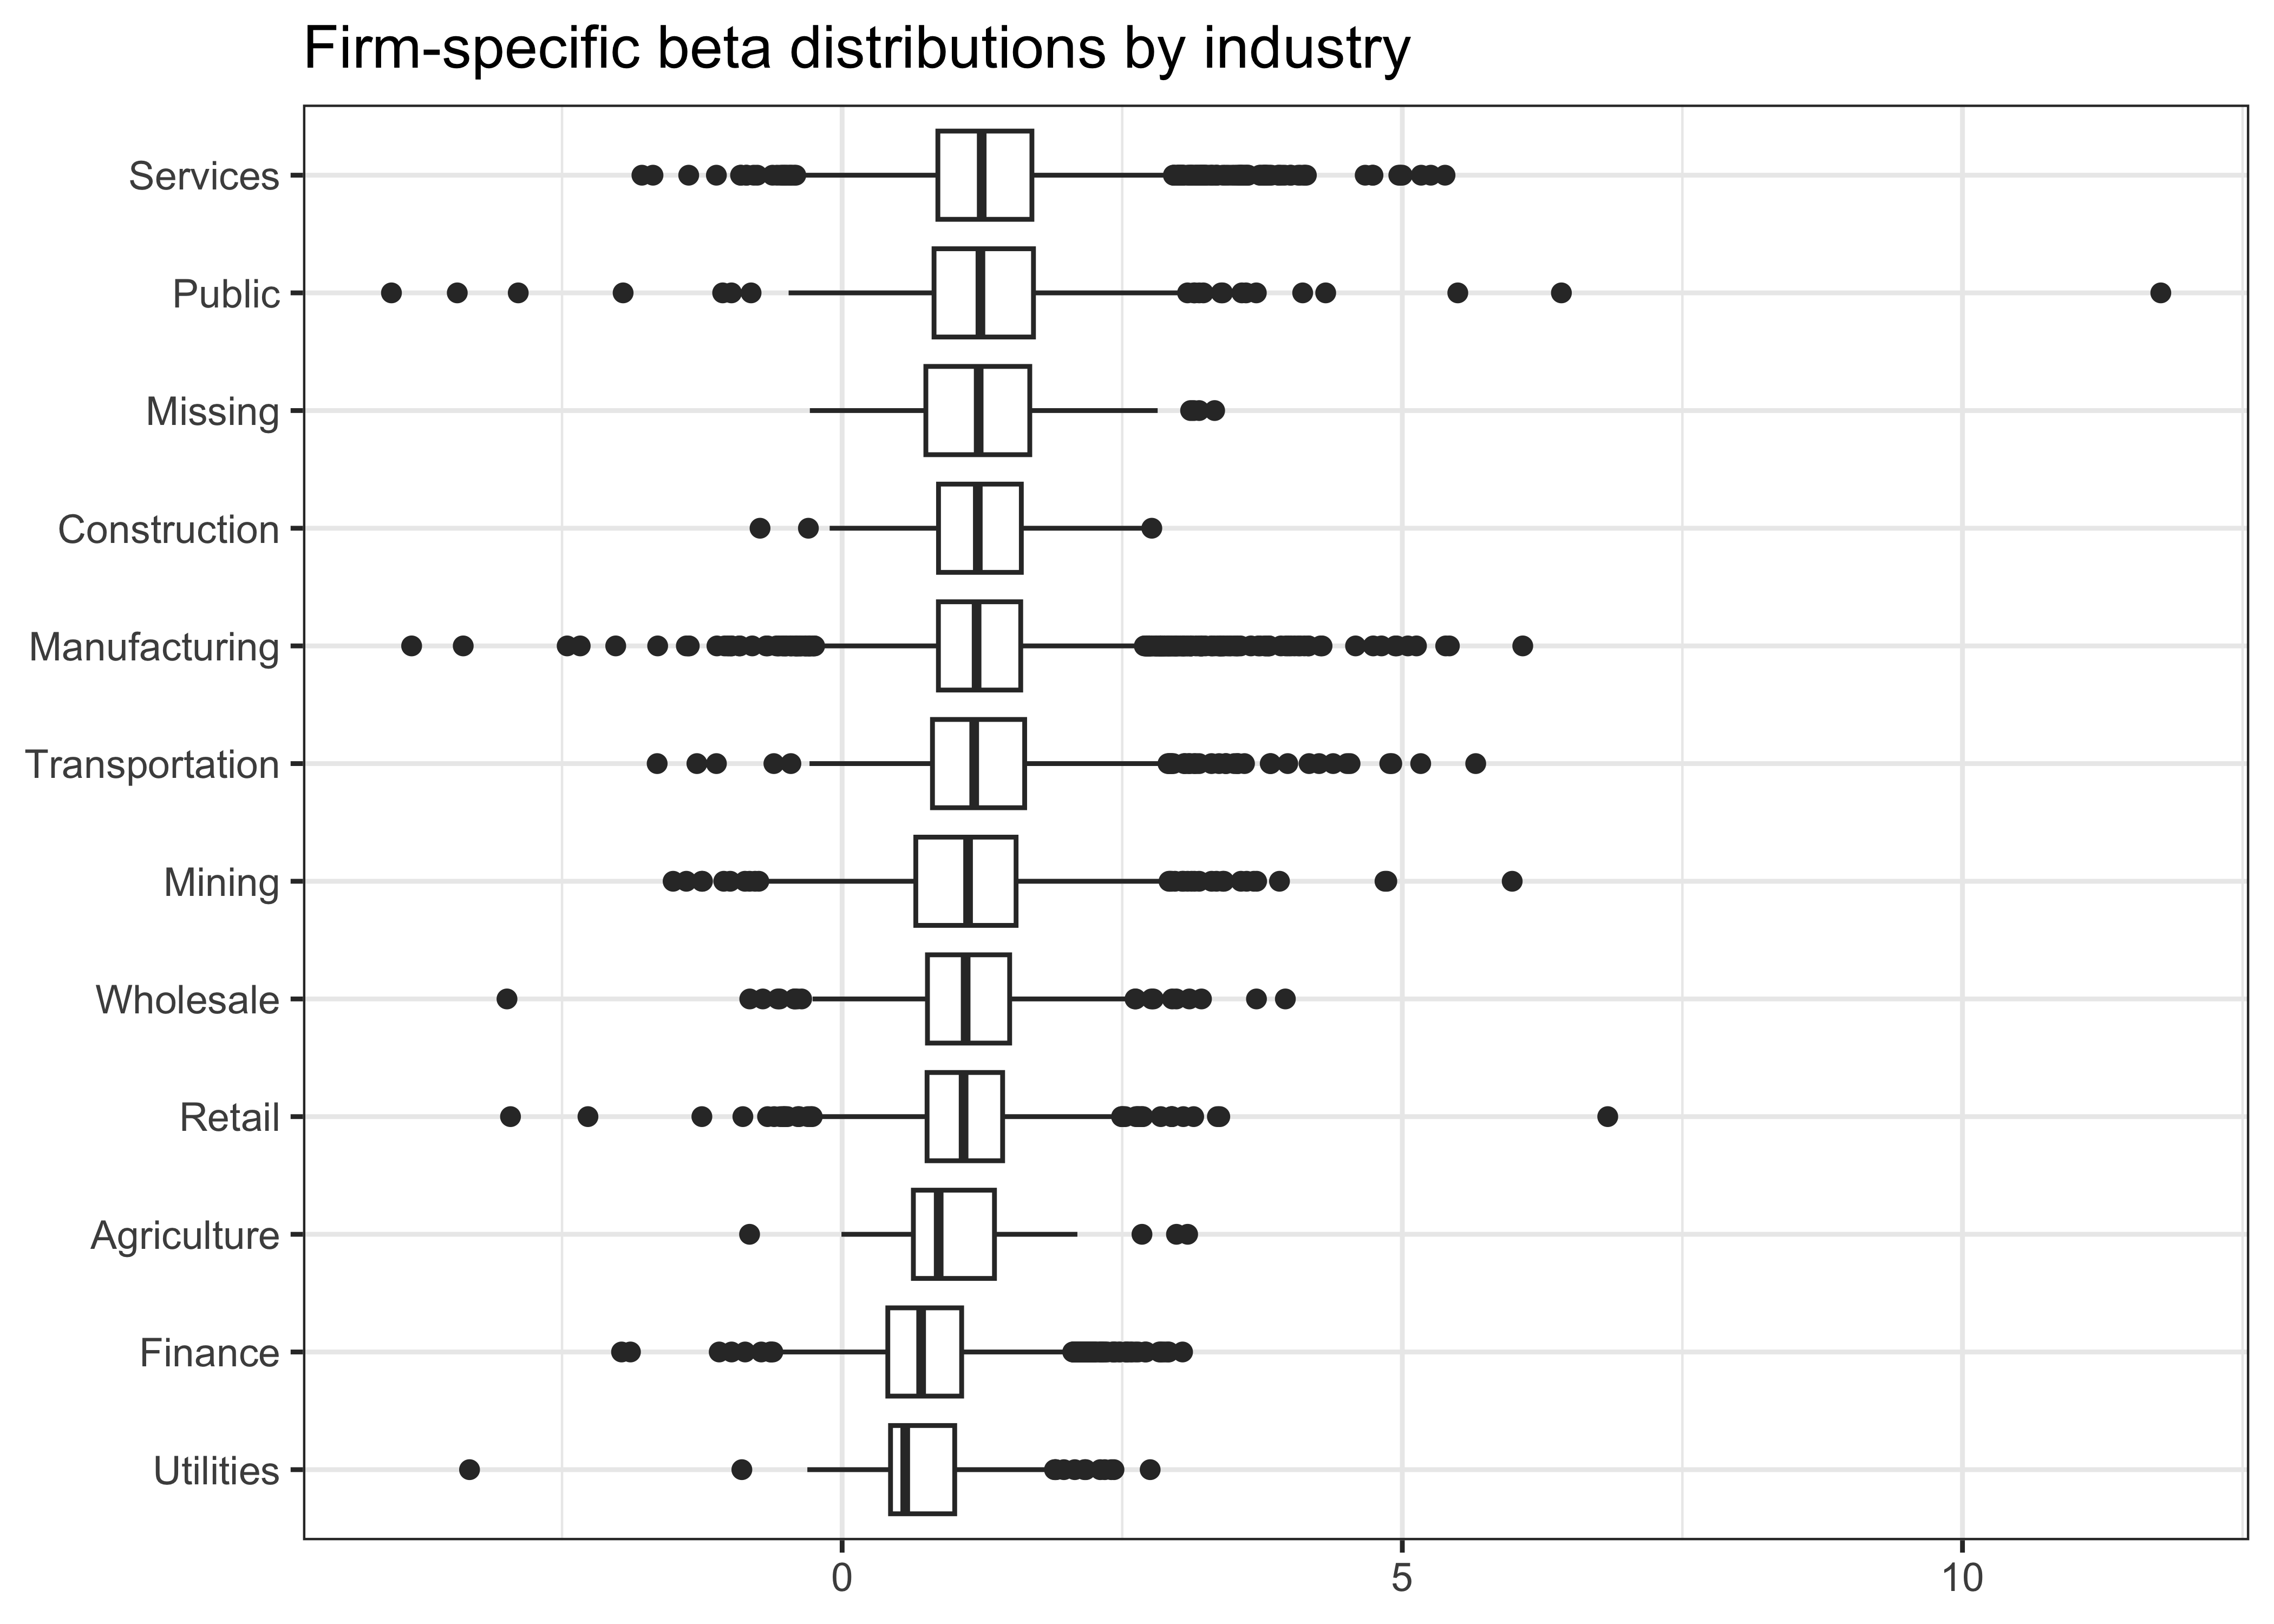 Title: Firm-specific beta distributions by industry. The figure shows box plots for each industry. Firms with the highest average CAPM beta belong to the public administration industry. Firms from the utility sector have the lowest average CAPM beta. The figure indicates very few outliers with negative CAPM betas. The large majority of all stocks has CAPM betas between 0.5 and 1.5.